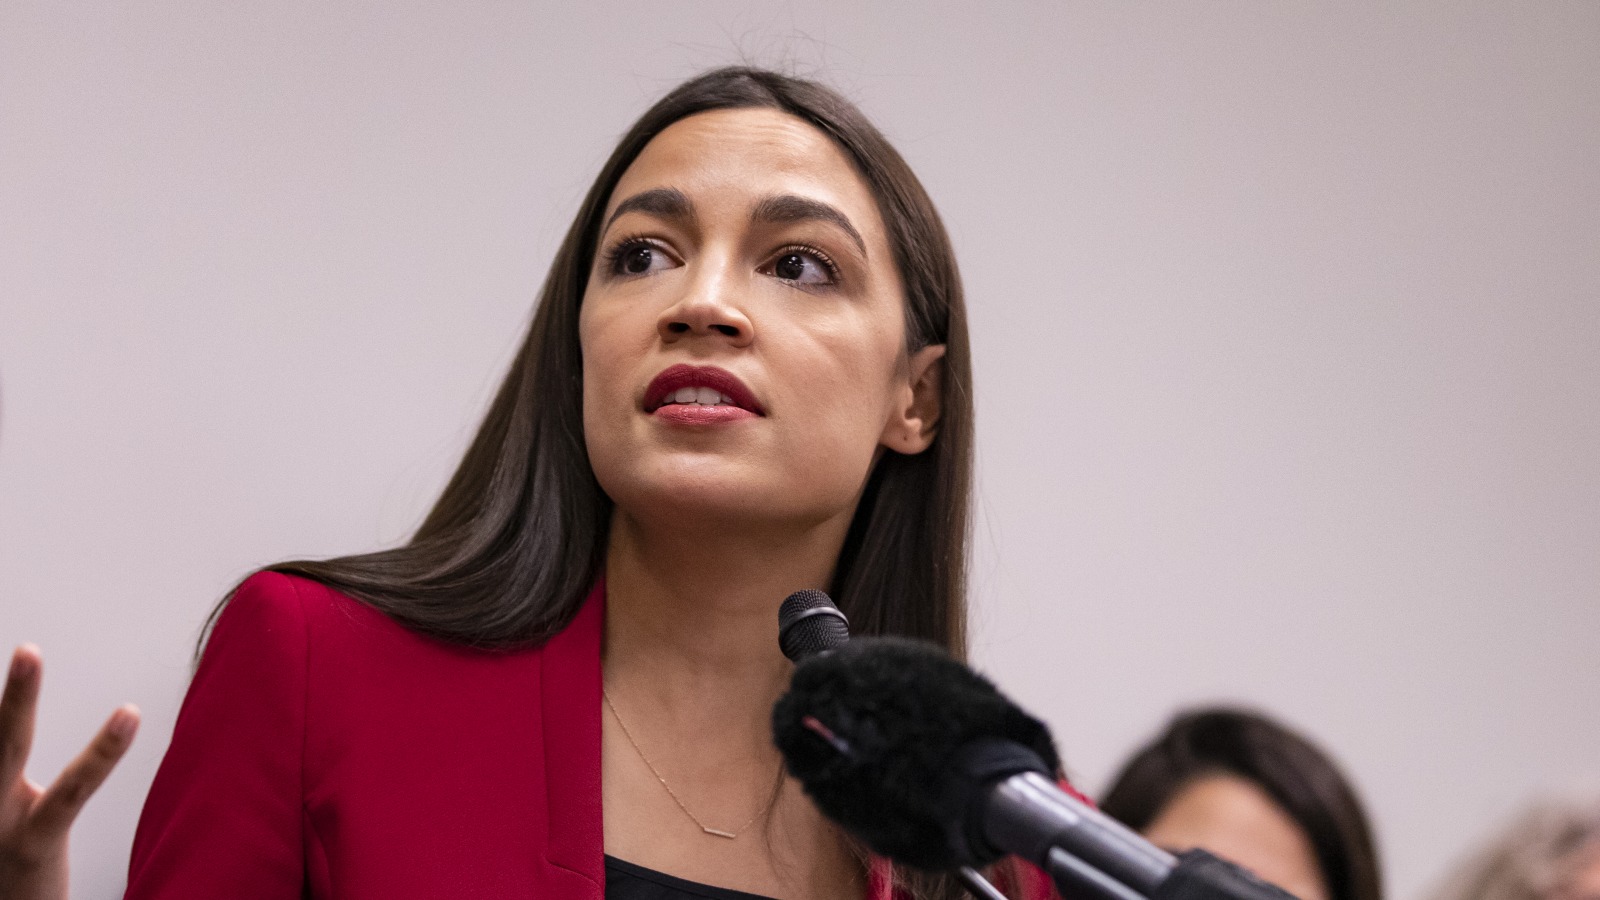 The Truth About Alexandria Ocasio-Cortez's Beauty Routine